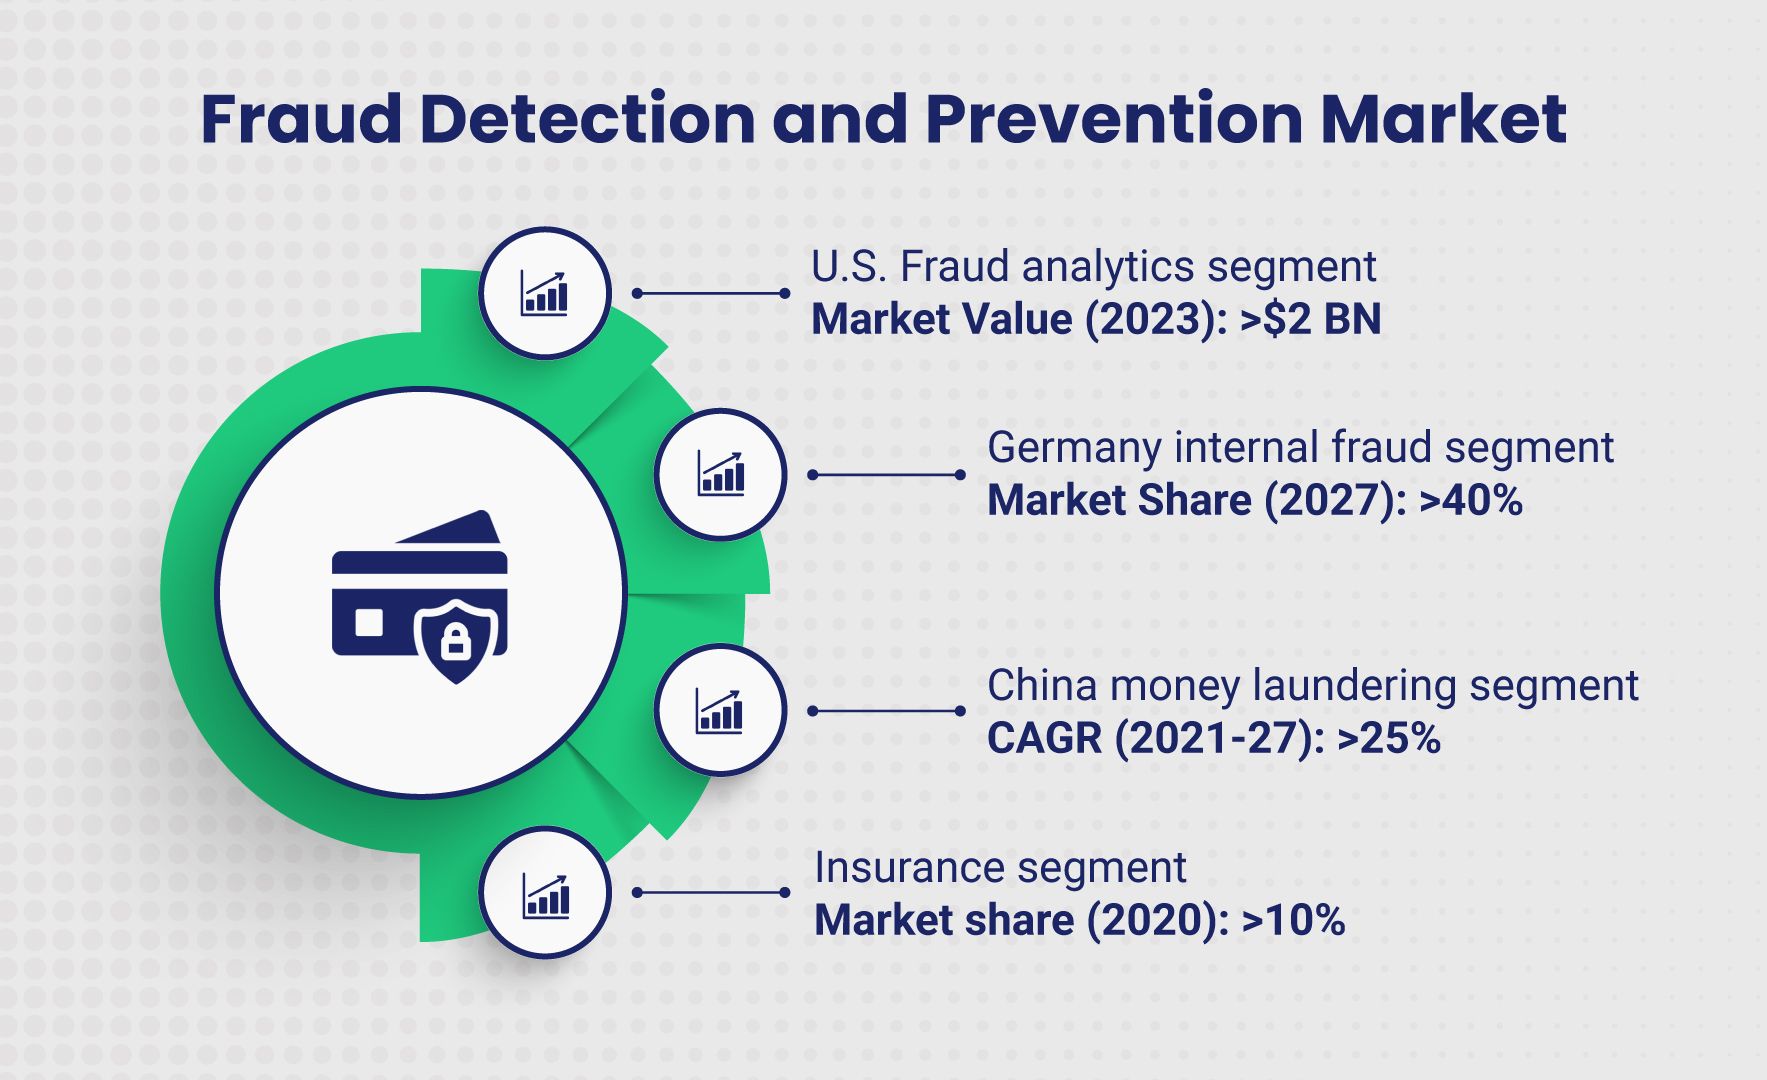 Fraud detection and prevention market